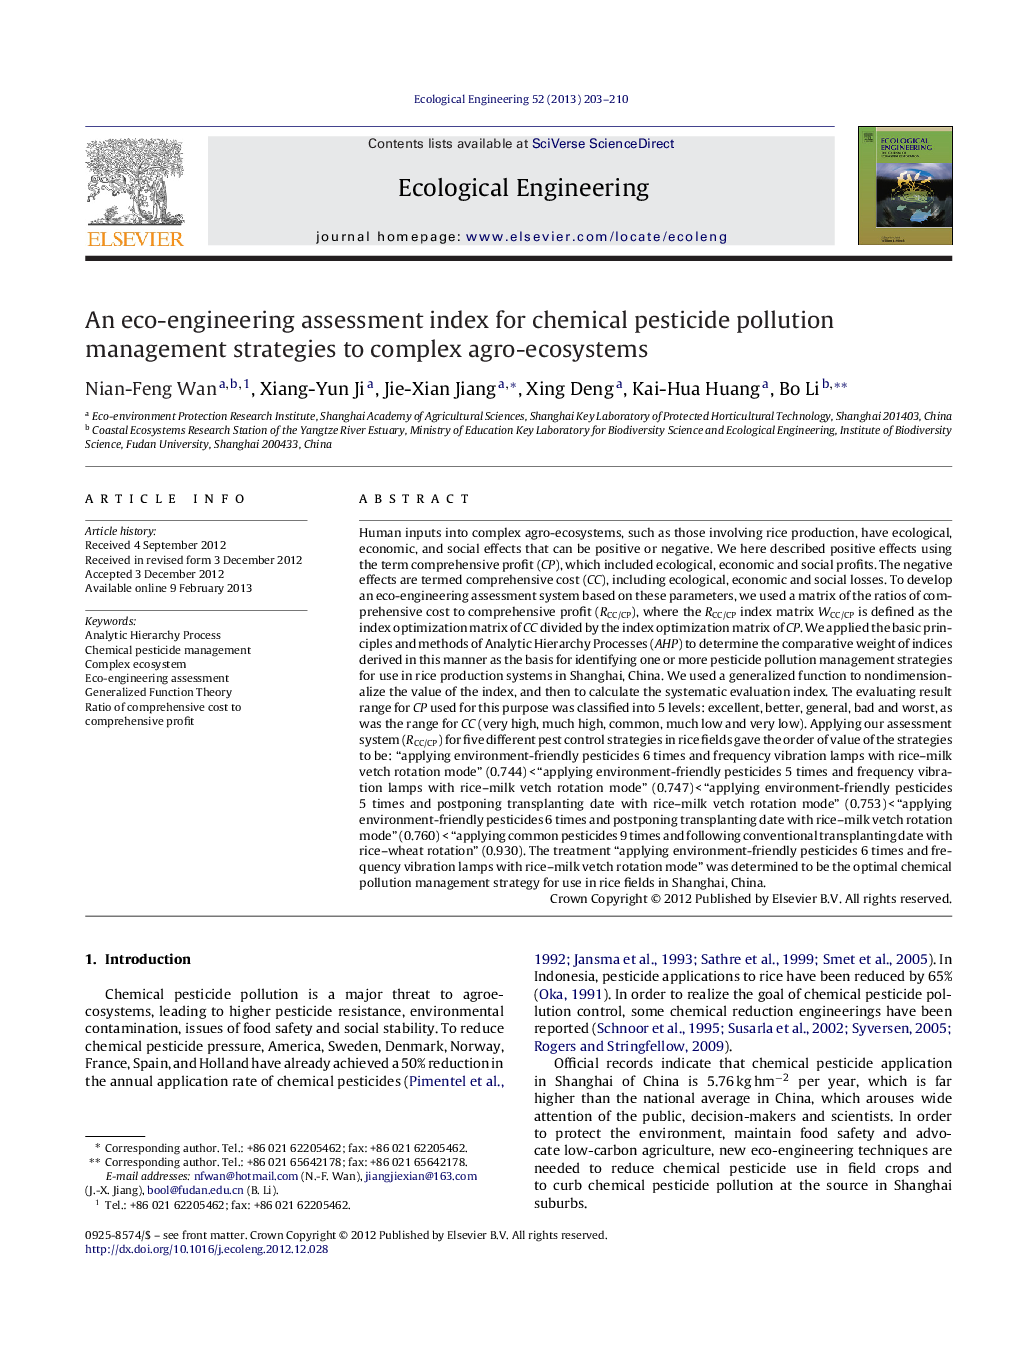 An eco-engineering assessment index for chemical pesticide pollution management strategies to complex agro-ecosystems